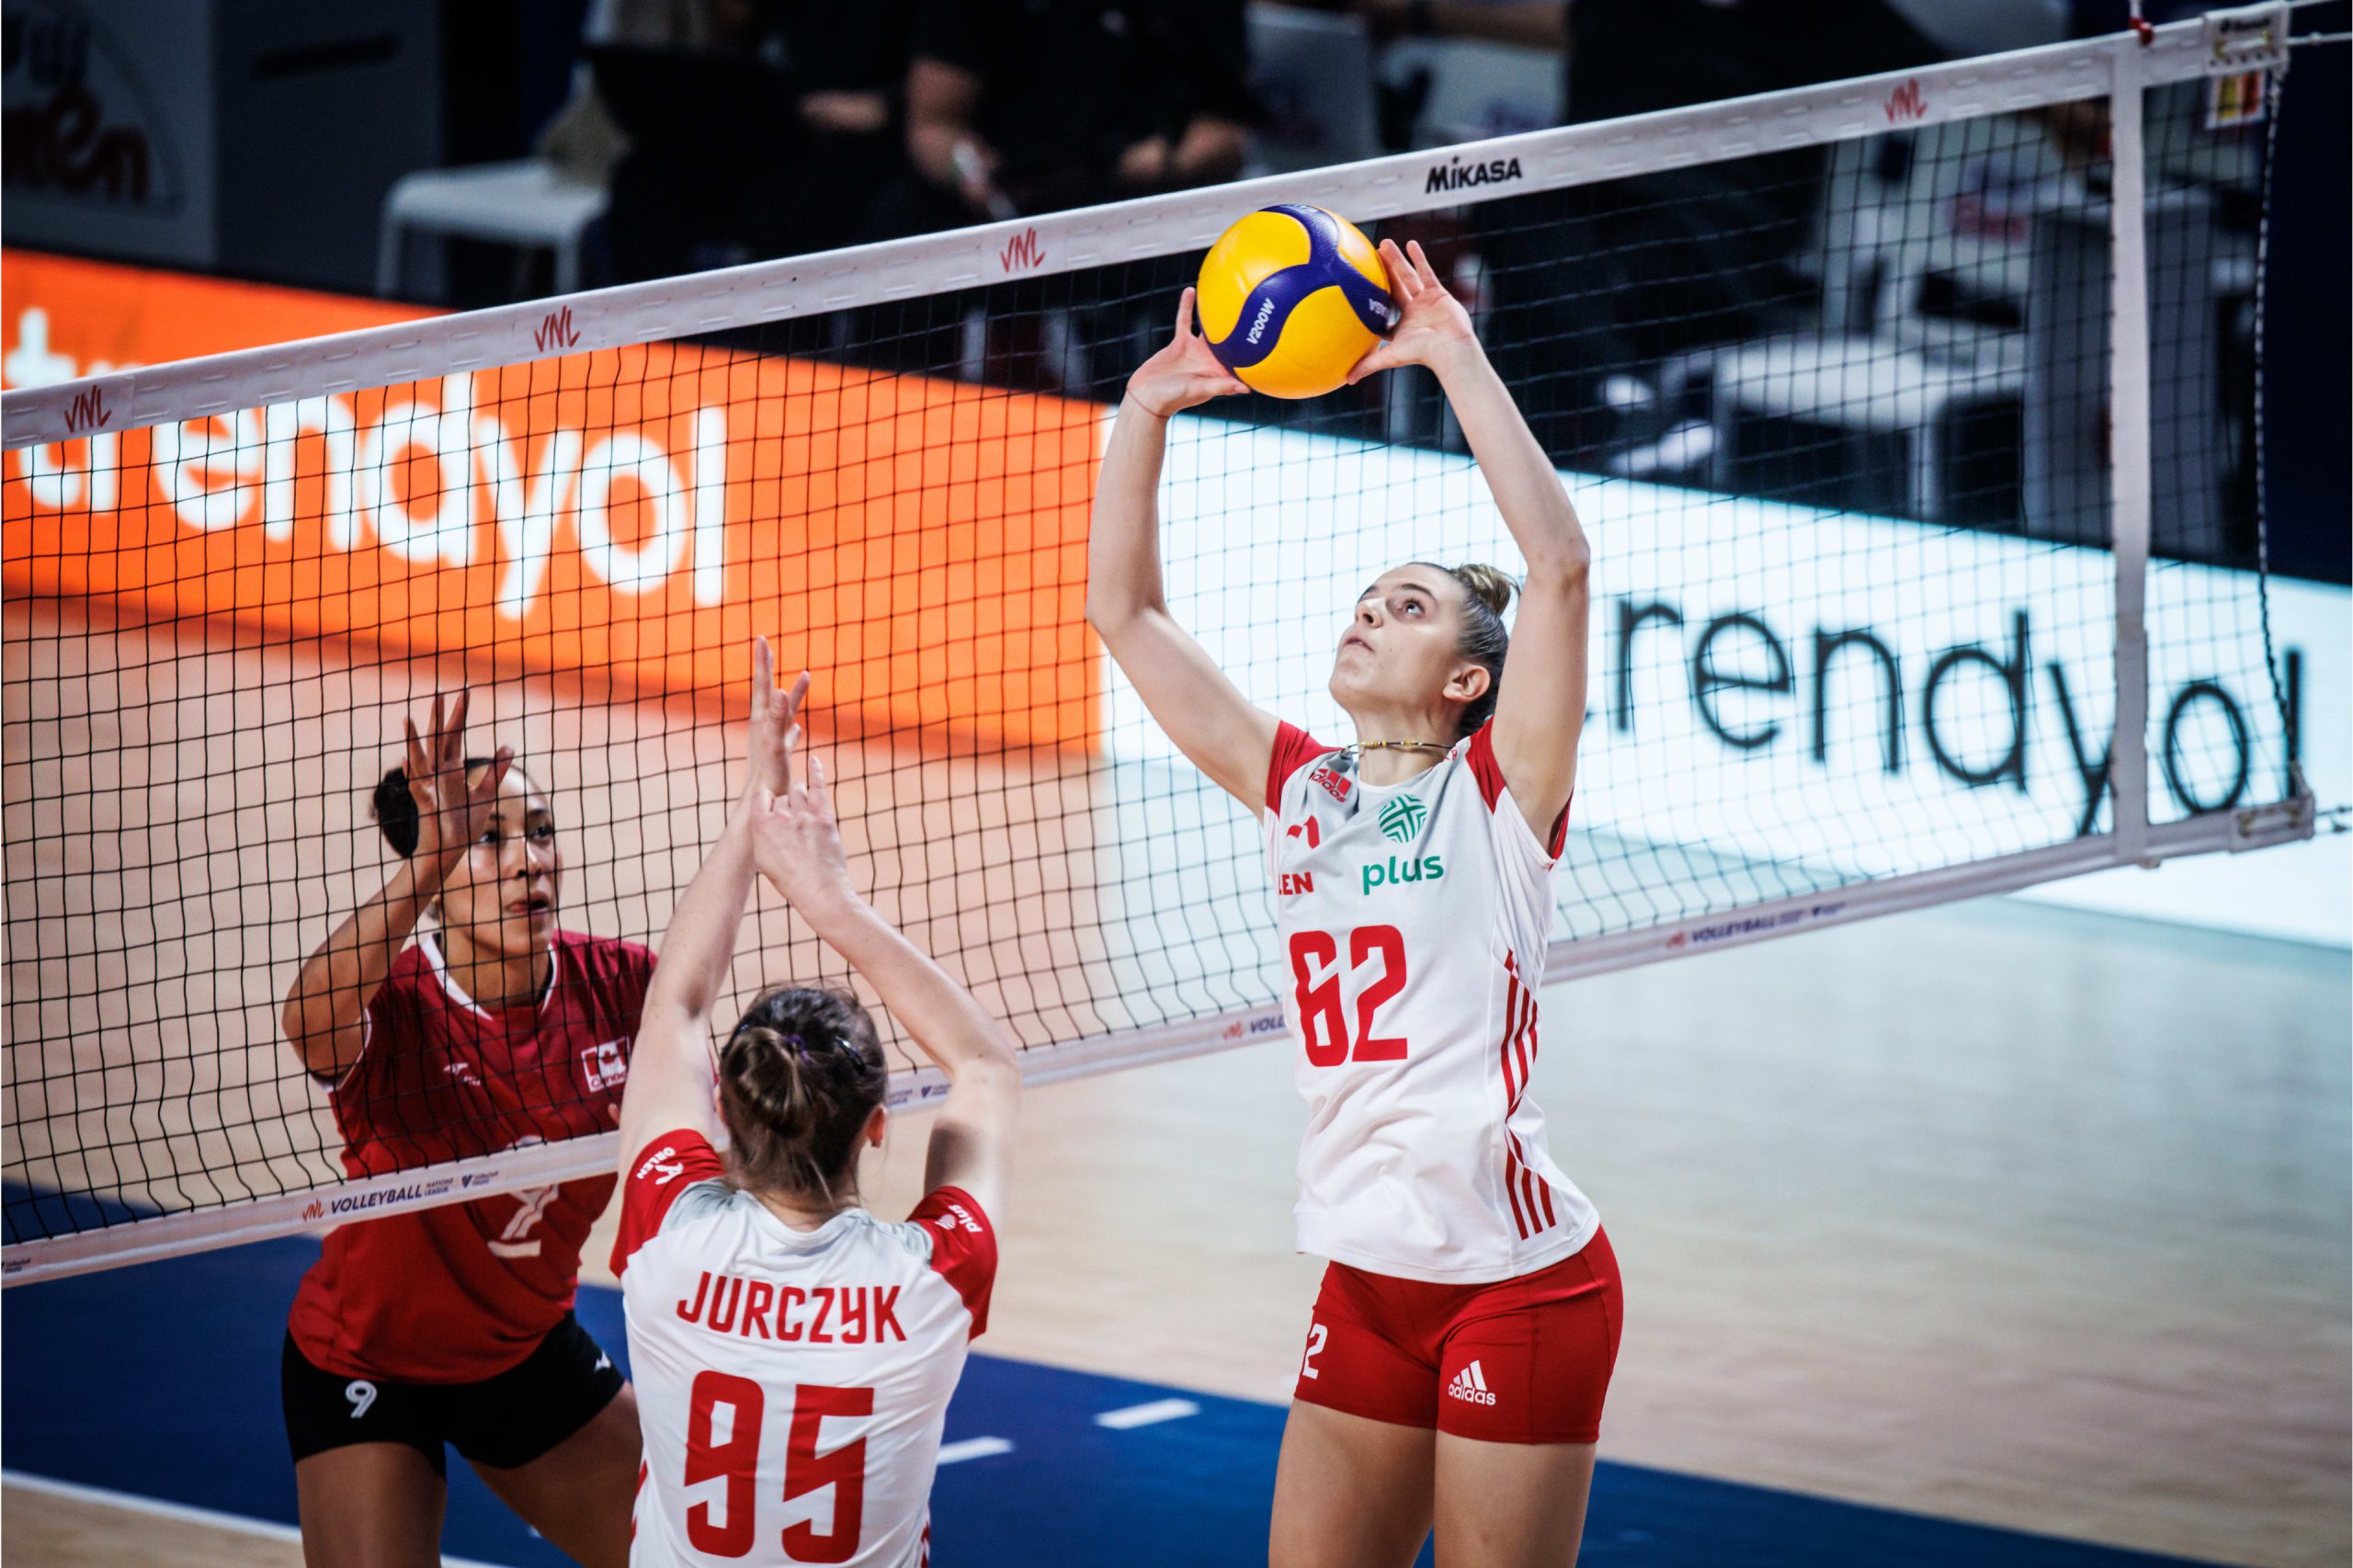 Poland defeated Canada in a five set thriller